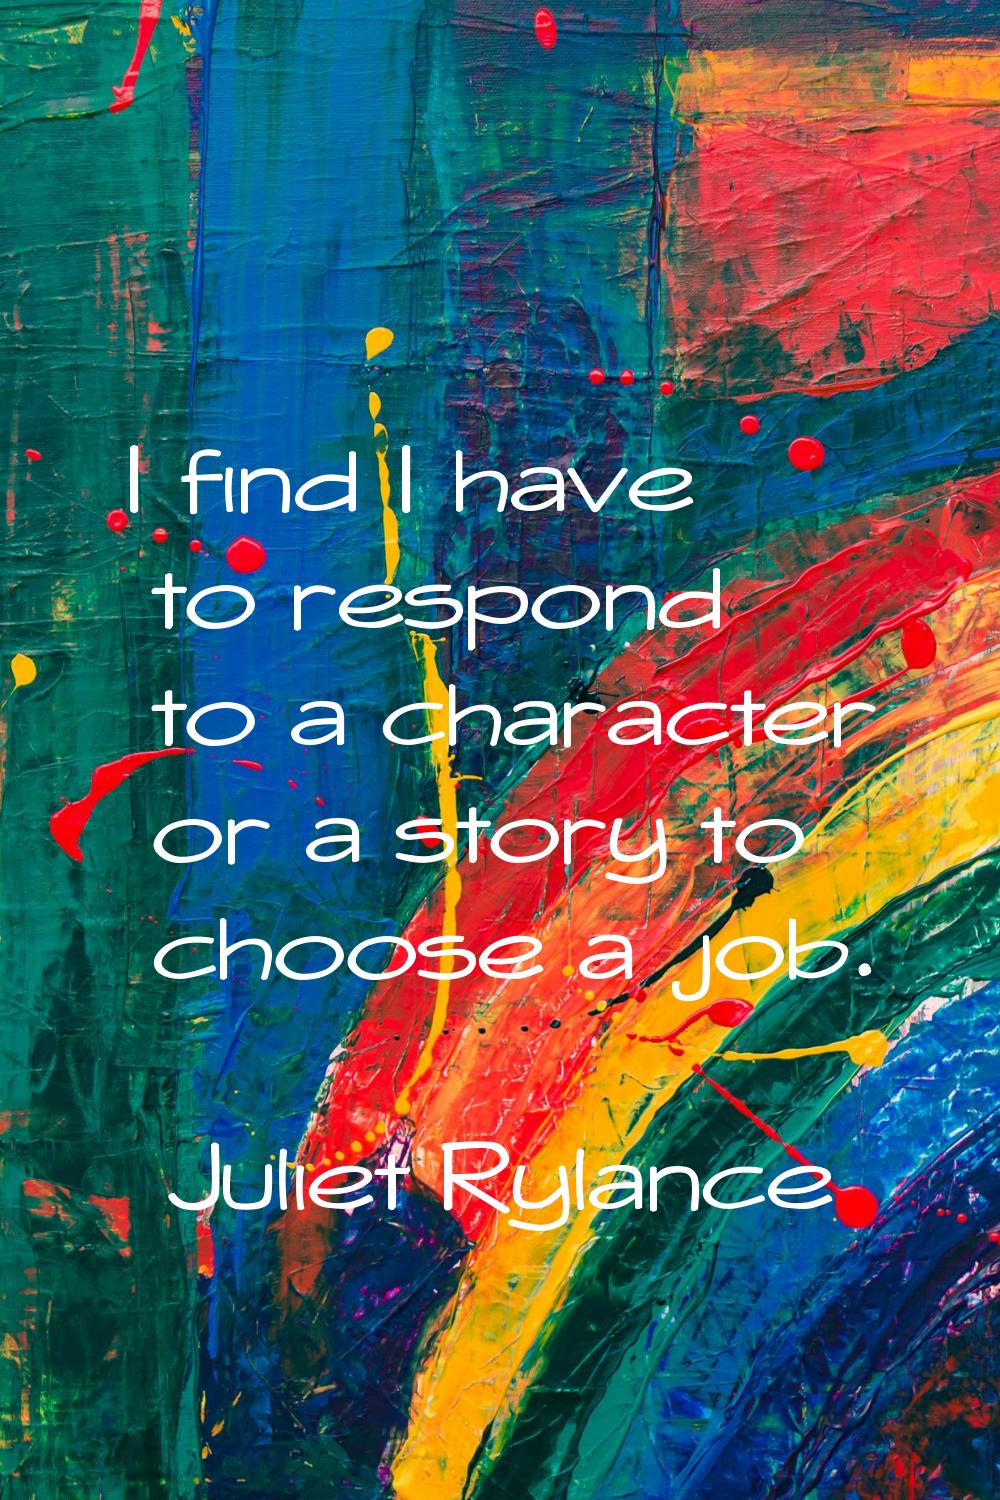 I find I have to respond to a character or a story to choose a job.